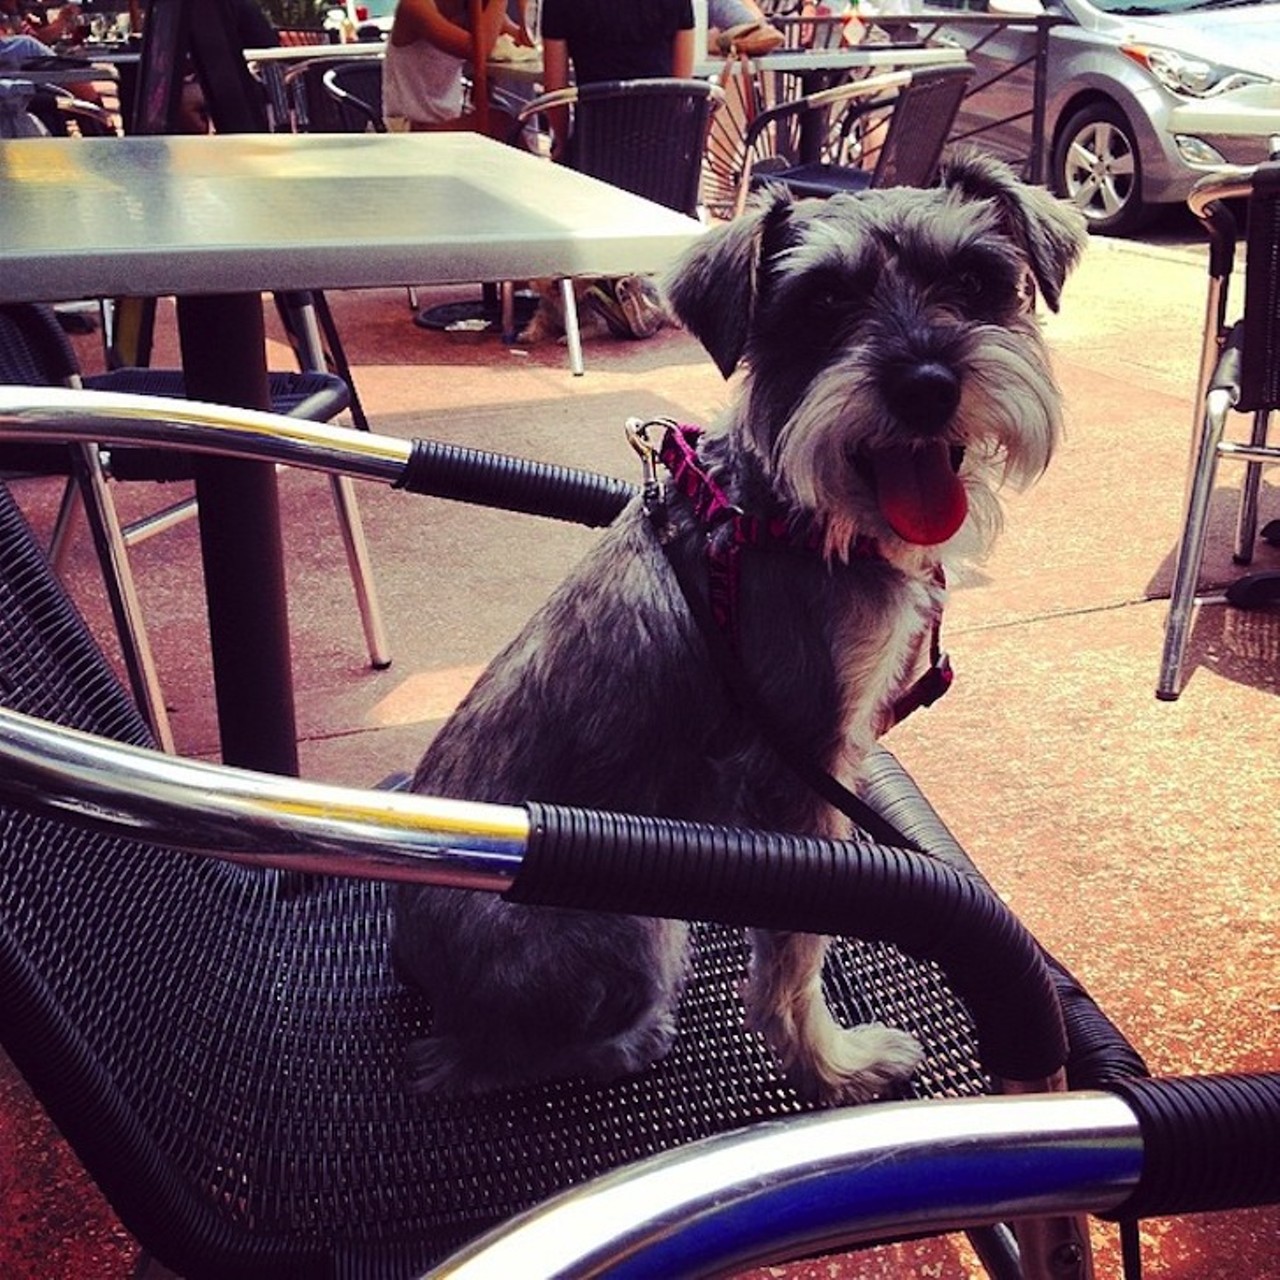 Dexter's of Thornton Park
808 E. Washington St. | 407-648-2777
Get boozy with your puppy pal on the patio at Dexter&#146;s either in the morning with mimosas or in the evening with your choice of over 30 different wines.
Photo via  arthurgmgodman/Instagram